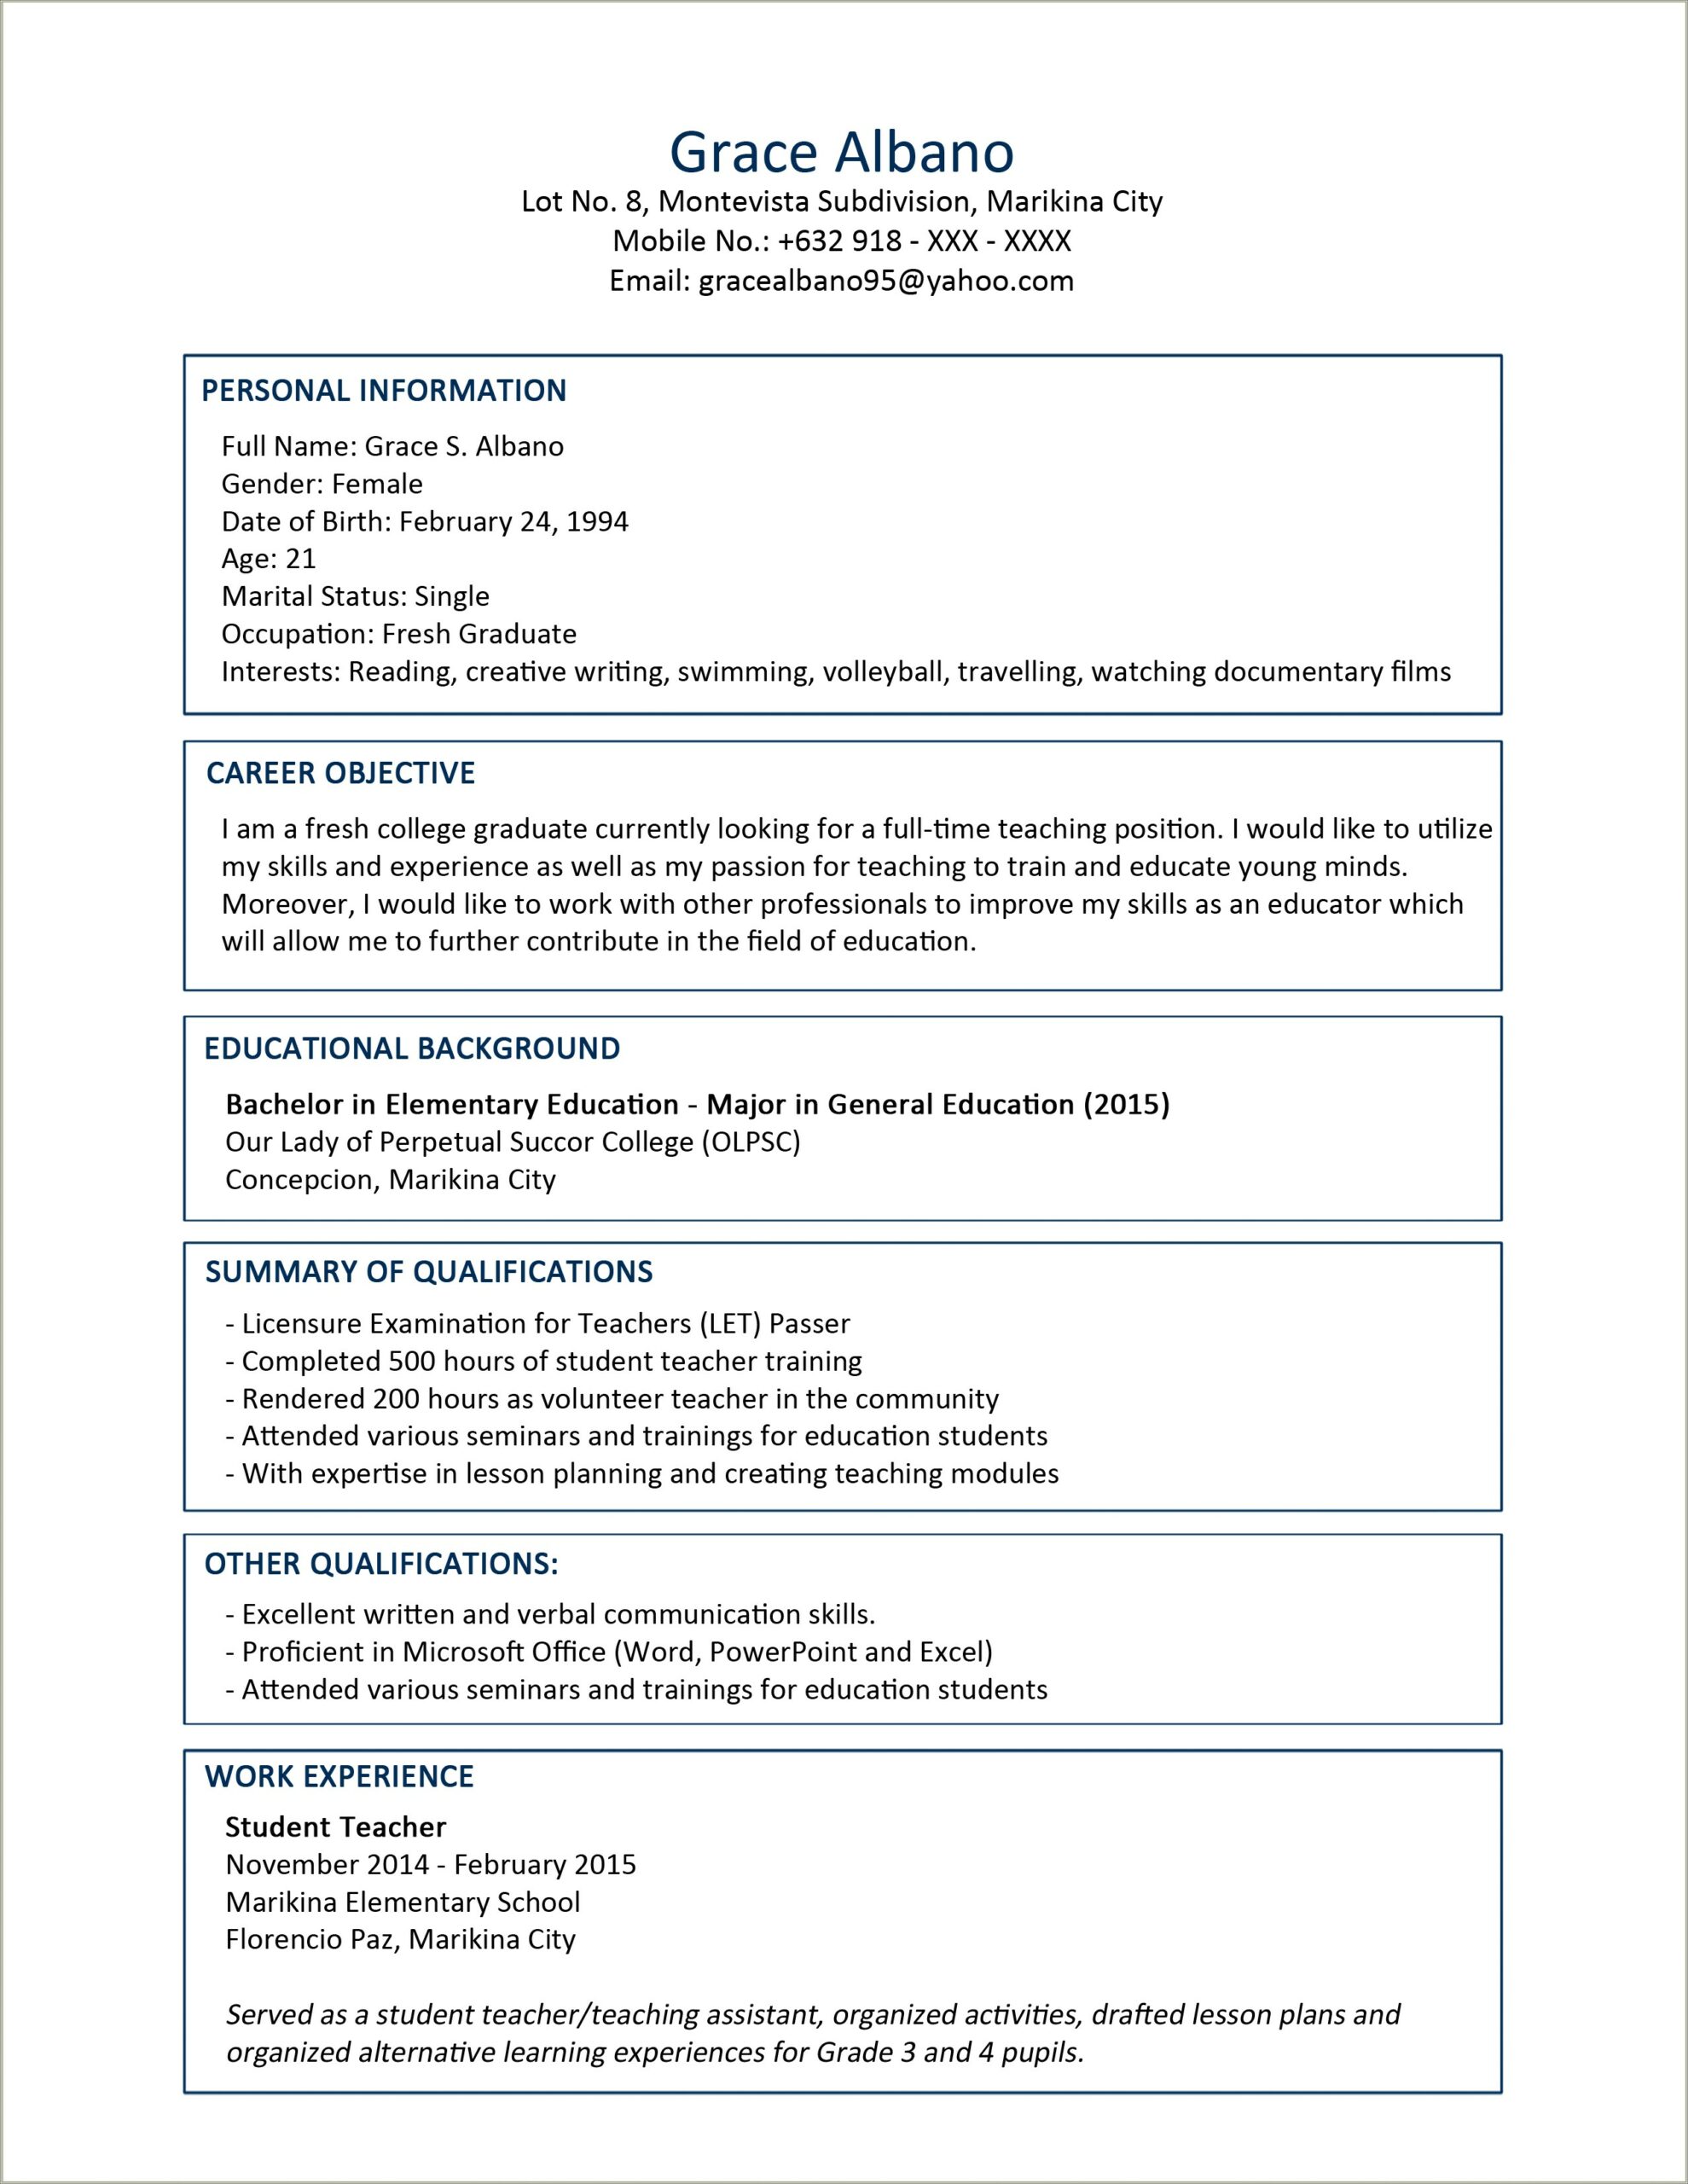 Sample Resume Of A Teacher Without Teaching Experience